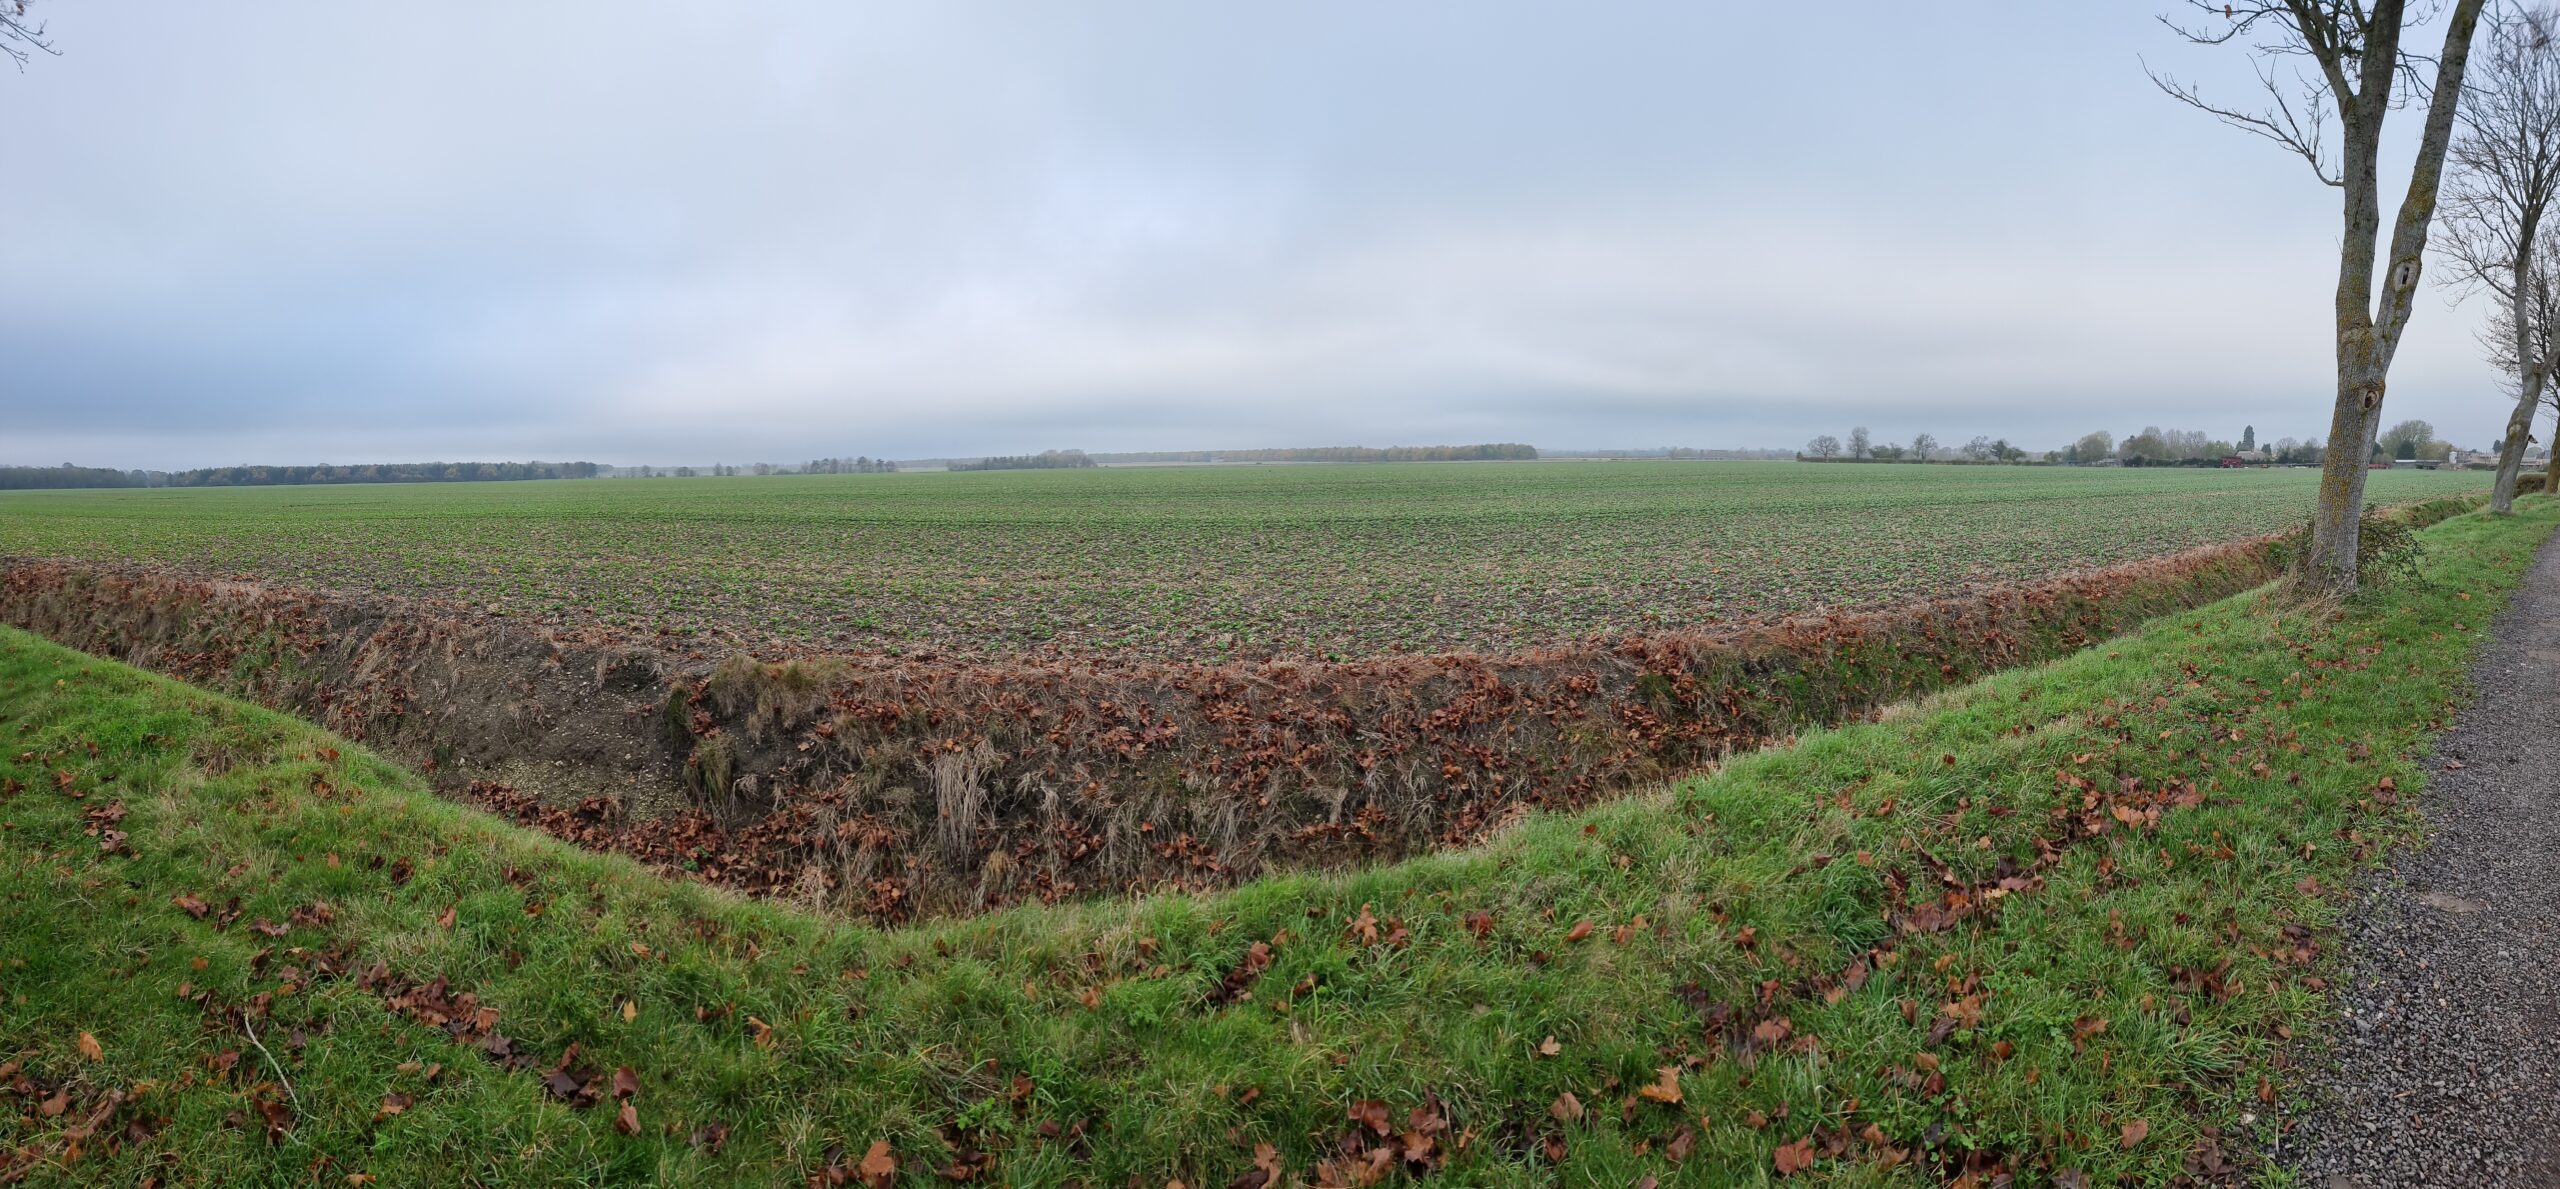 Panorama showing flat autumn fields, fallow, on the other side of a ditch. A distant tree line and farm buildings mark the far end of the field.